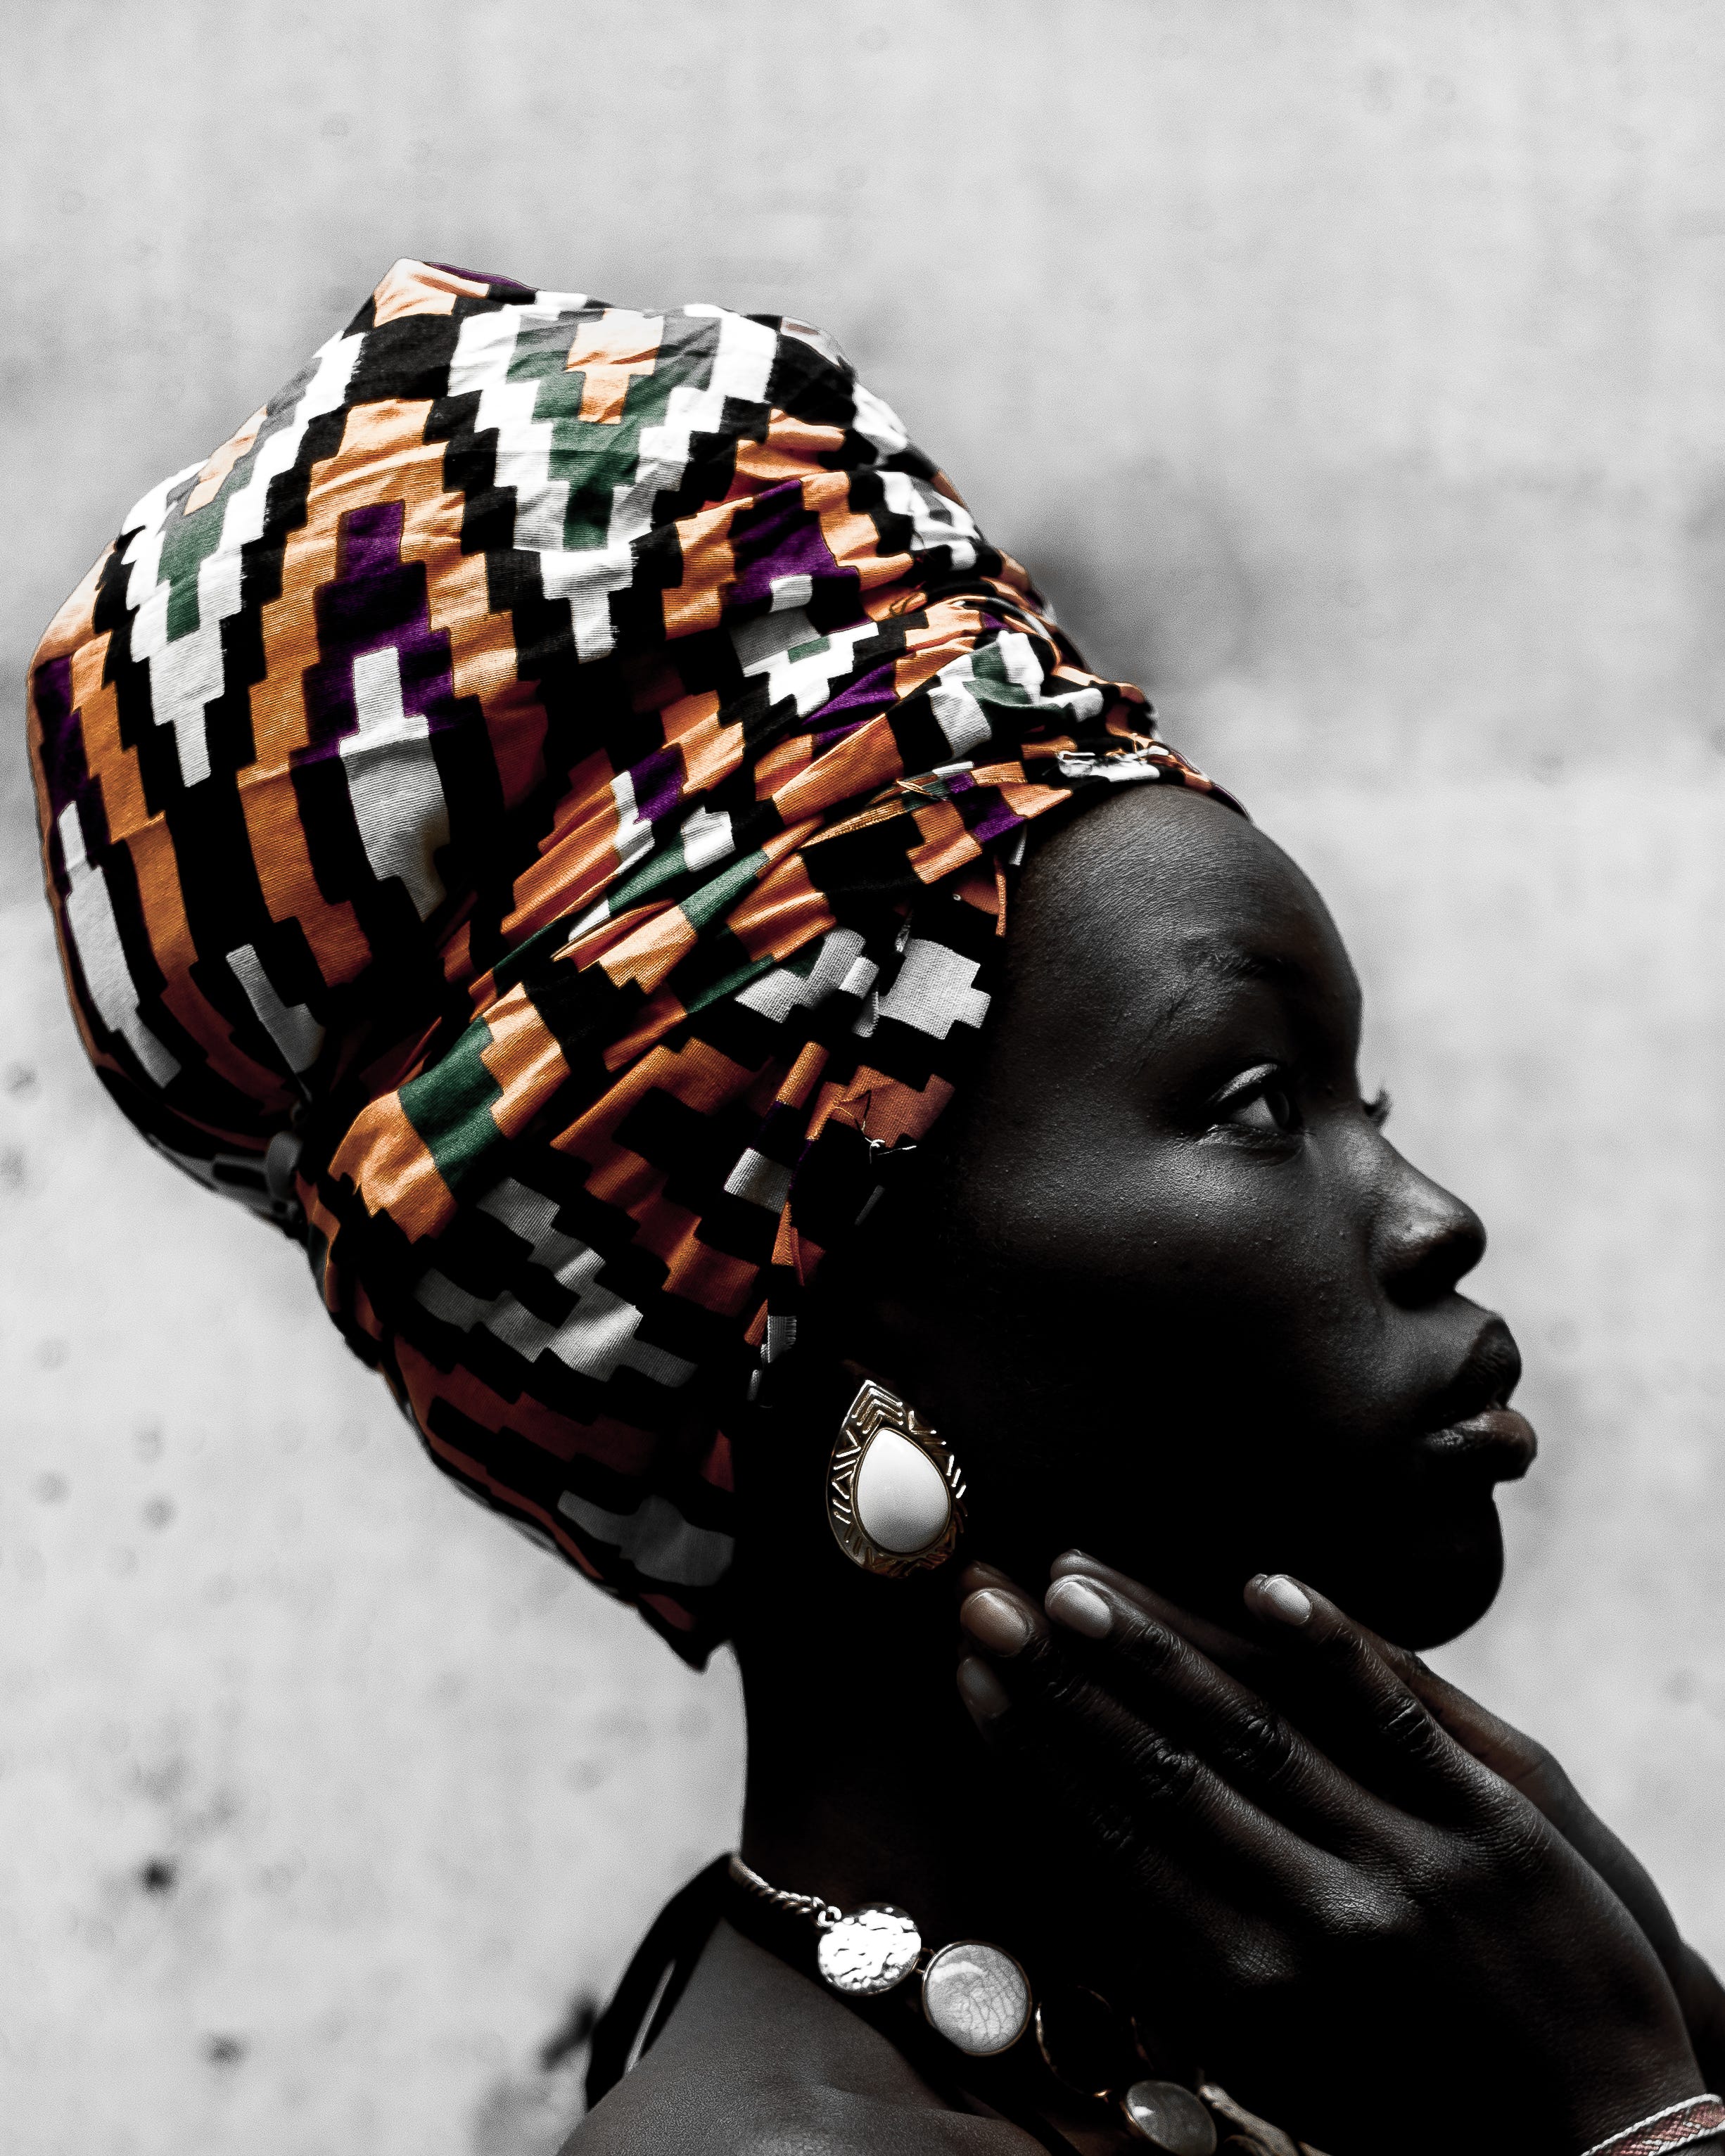 A Brief History on Why White Women Should Not Wear or Sell Head-Wraps